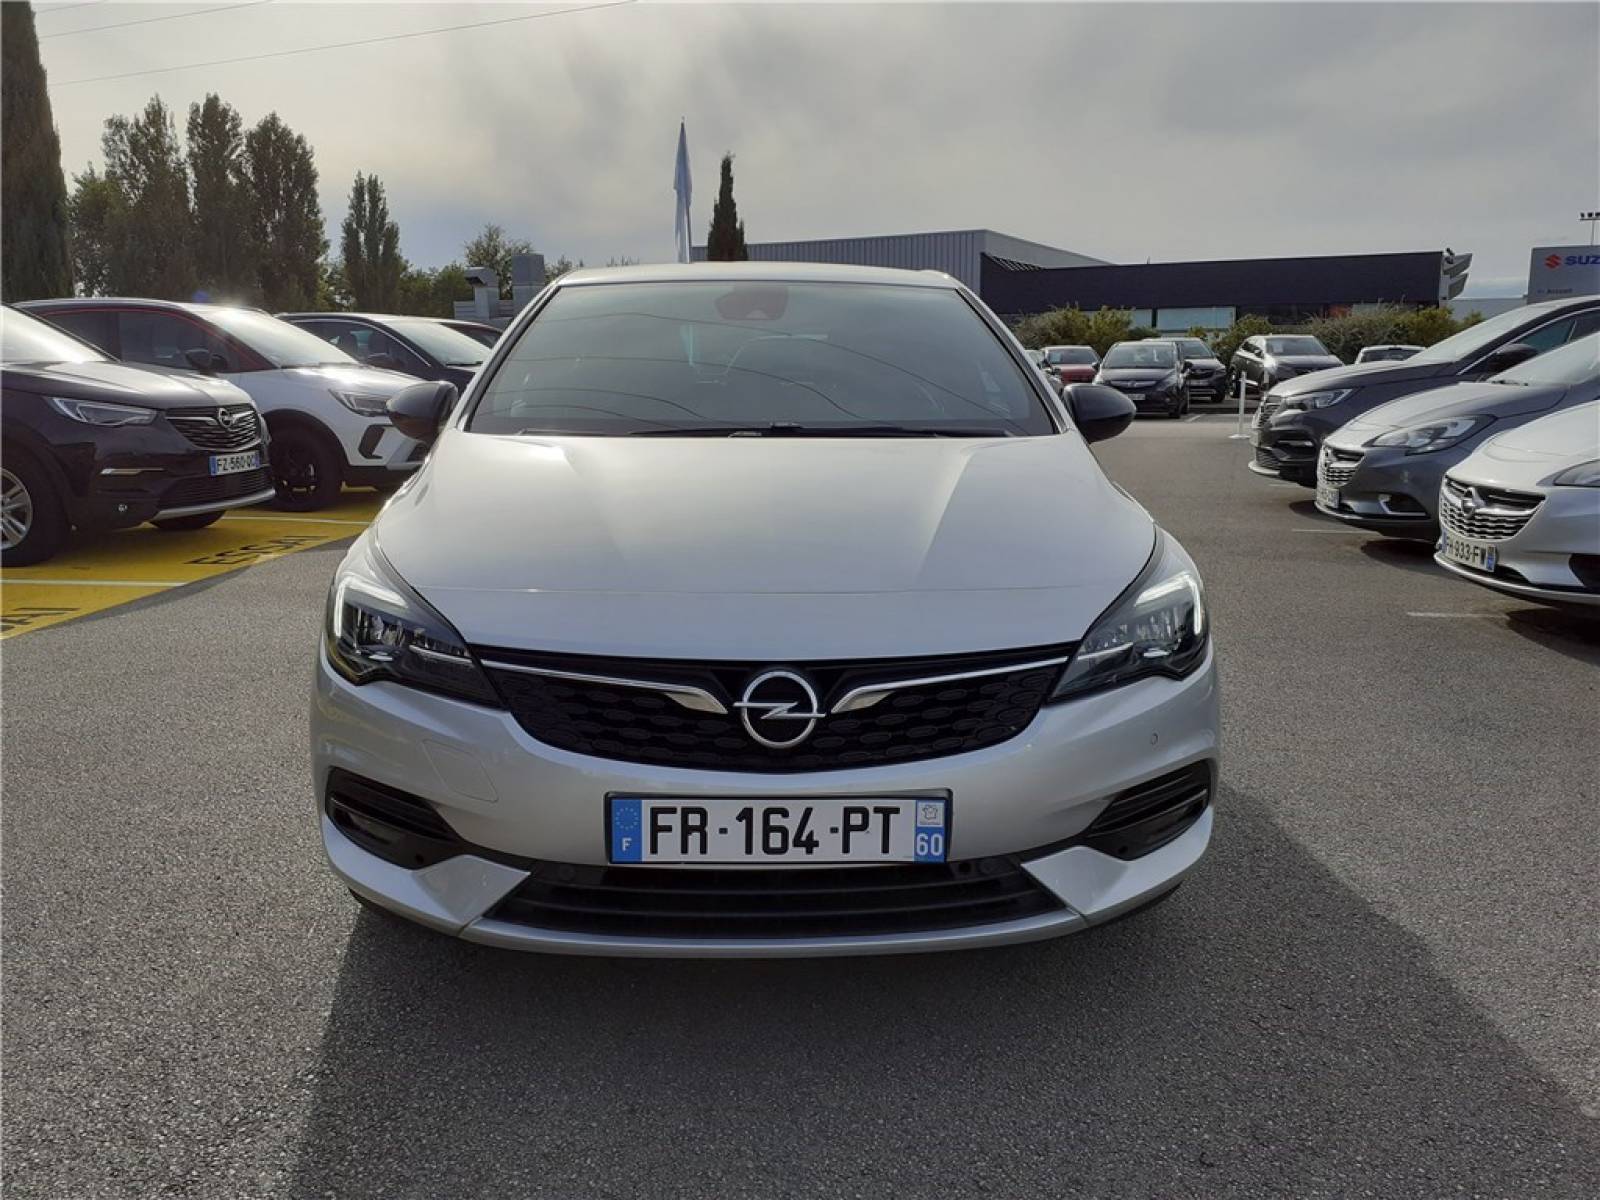 OPEL Astra 1.2 Turbo 130 ch BVM6 - véhicule d'occasion - Groupe Guillet - Opel Magicauto - Chalon-sur-Saône - 71380 - Saint-Marcel - 2